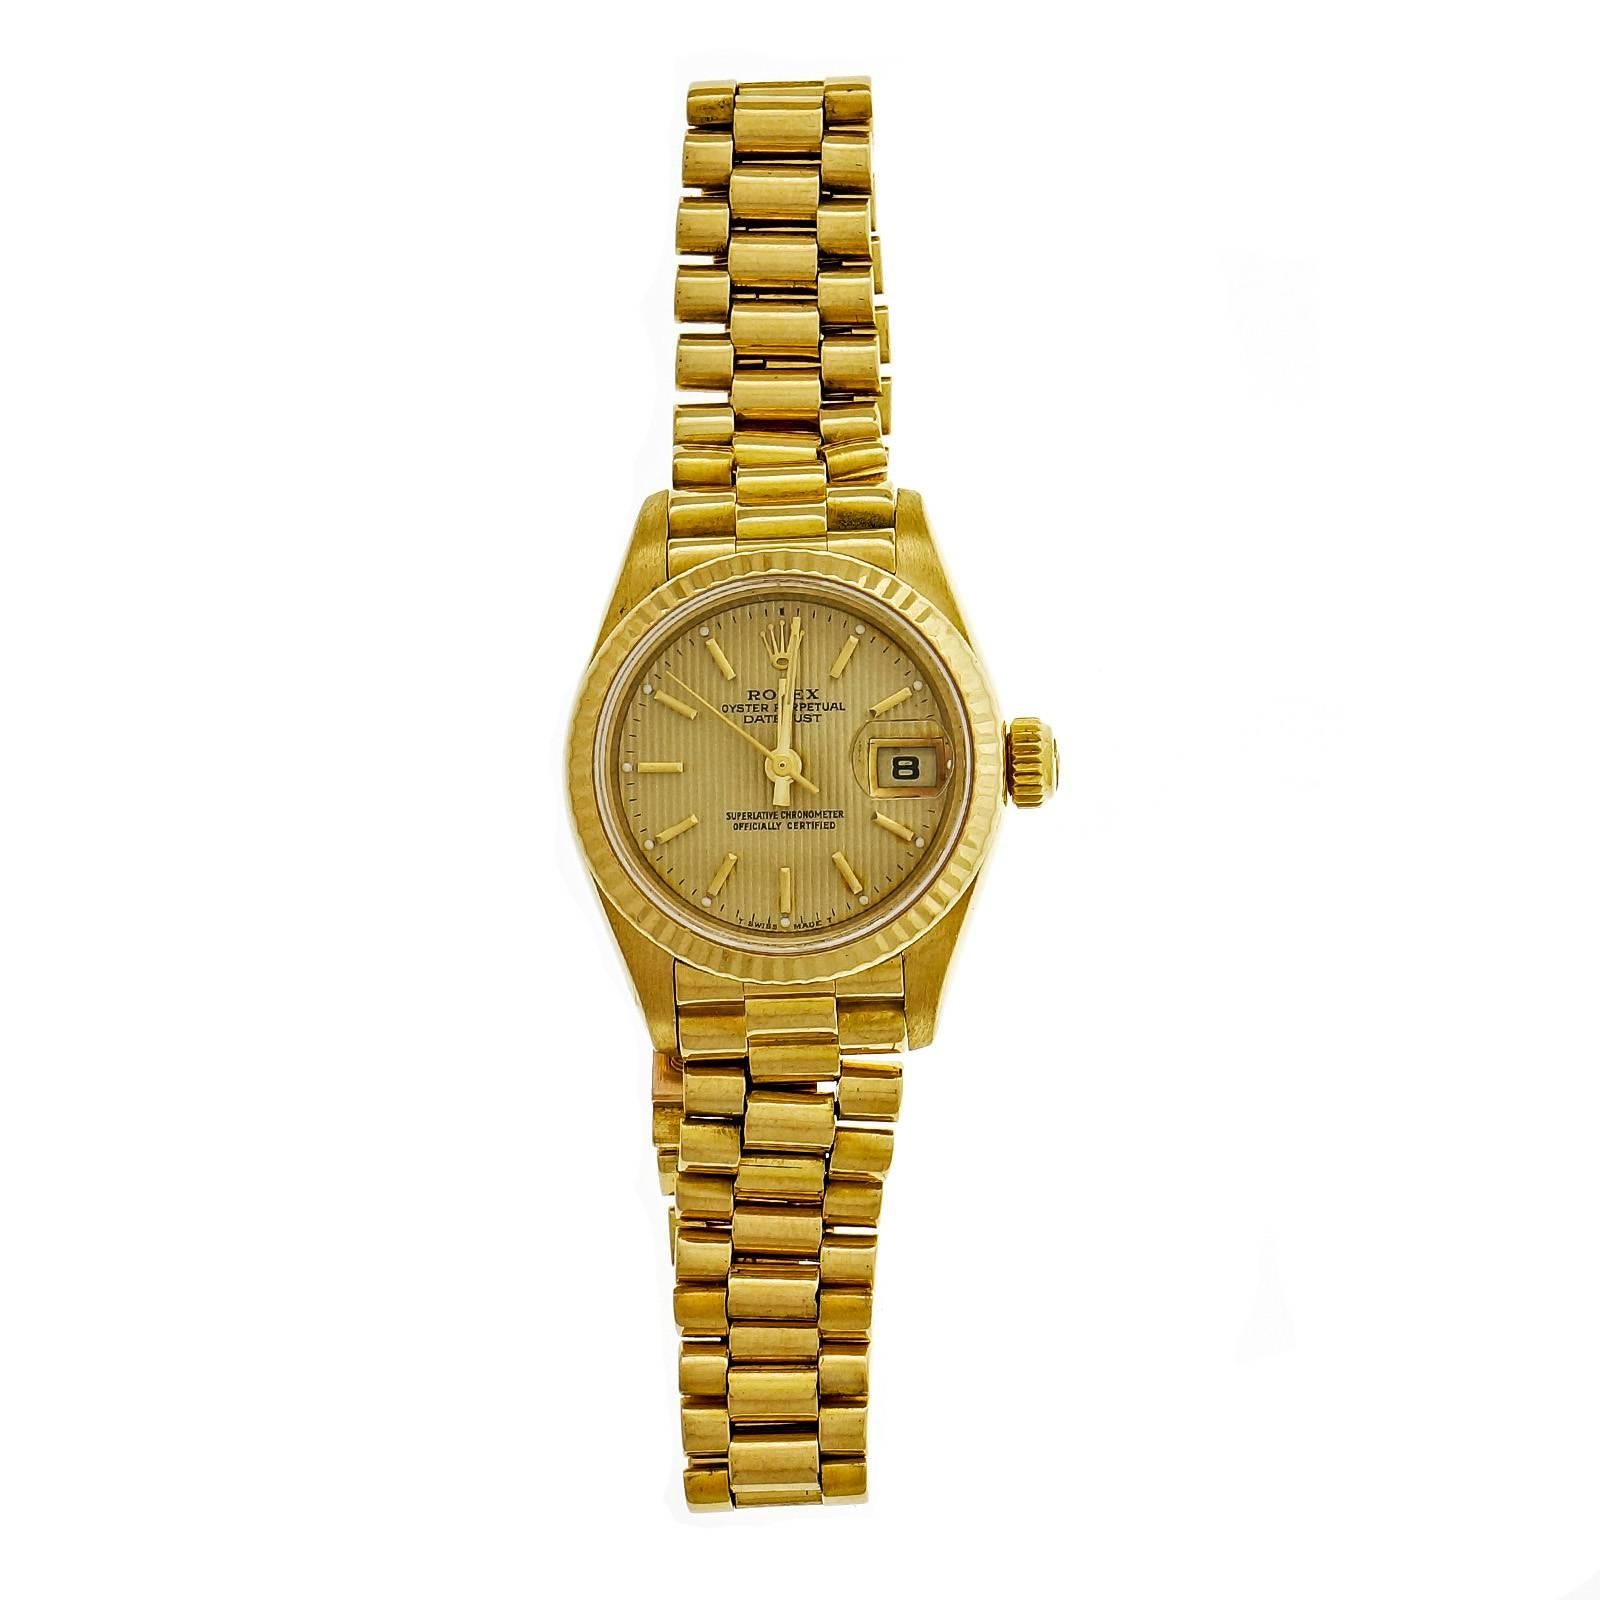 Ladies Rolex President with gold tone pin stripe dial and Presidential band. Model 69178. Band shows moderate stretch but fully wearable. Circa 1990.

18k yellow gold
Strap length: 6 7/8 inches 
71.3 grams 
Length: 35mm 
Width: 26mm 
Band